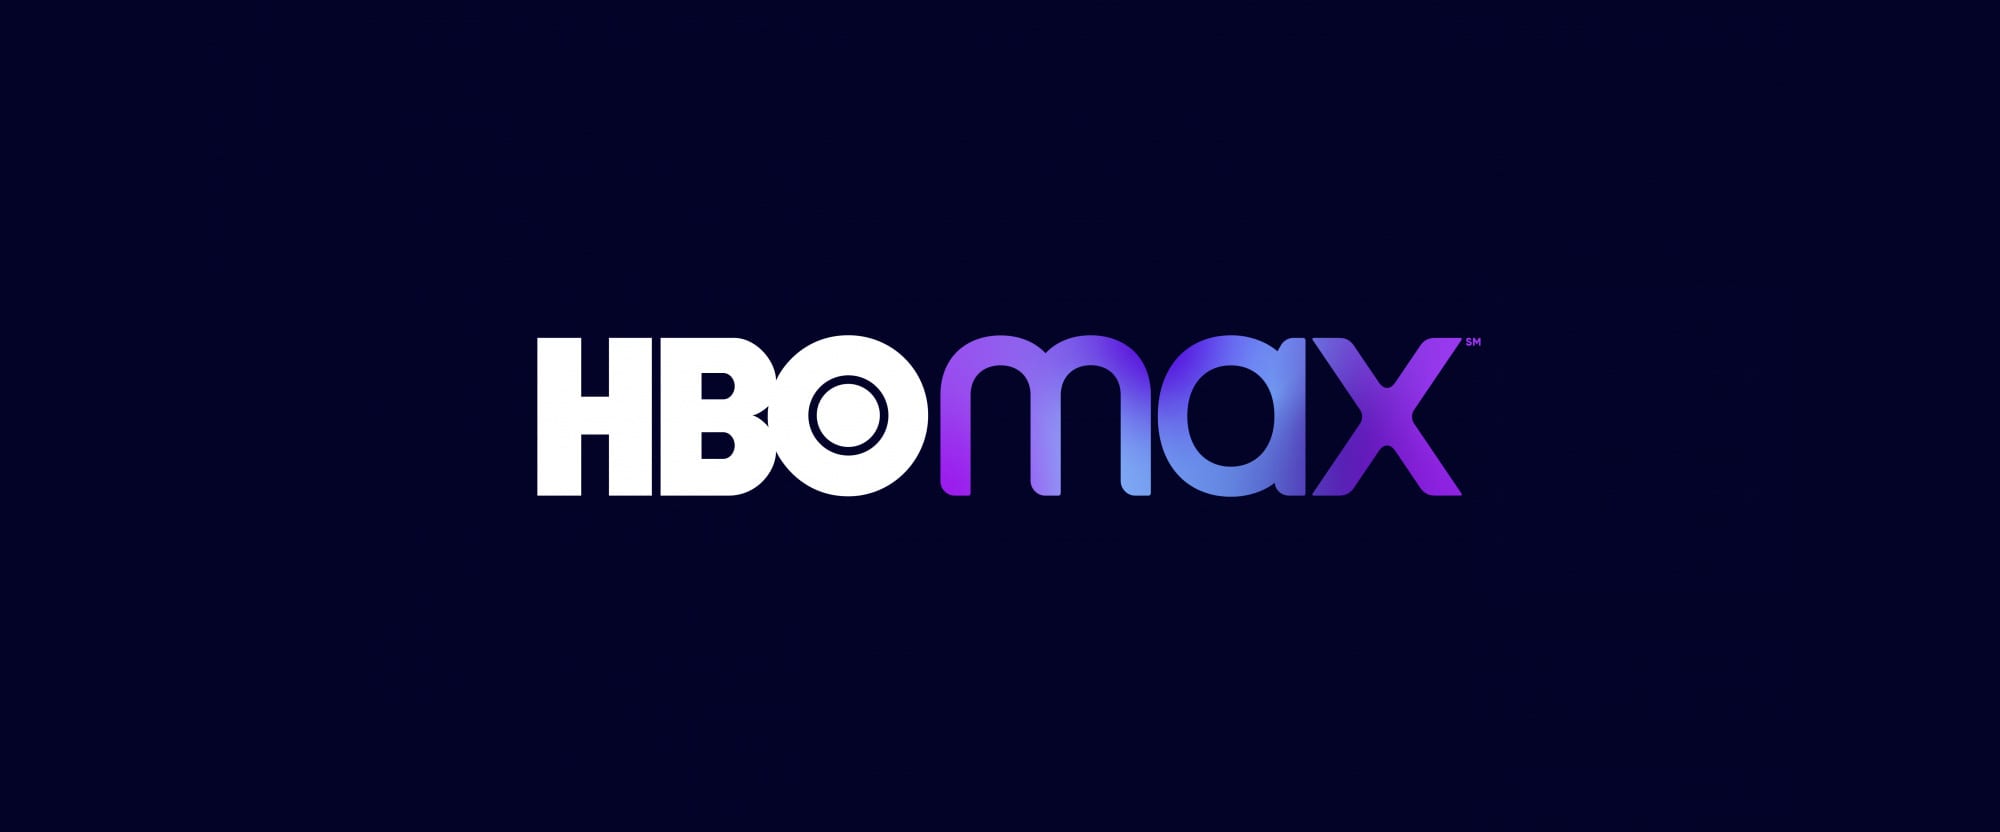 May 2021 Releases on Netflix  Disney   HBO Max  Hulu   Prime Video - 59